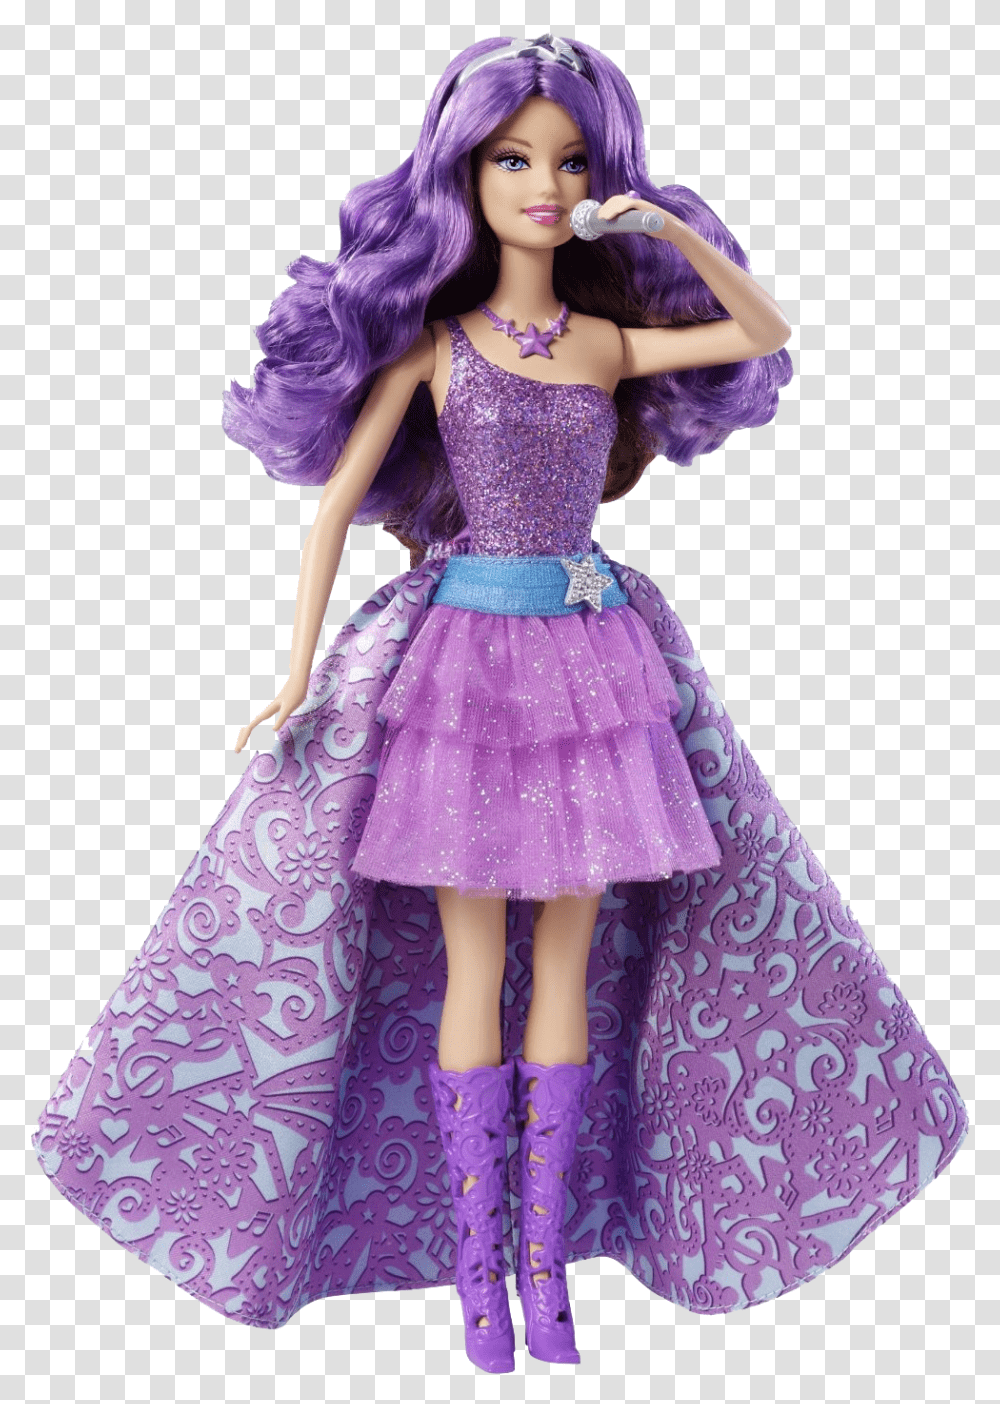 Barbie Doll Pic Barbie The Princess And The Popstar Dolls, Toy, Figurine, Person, Human Transparent Png